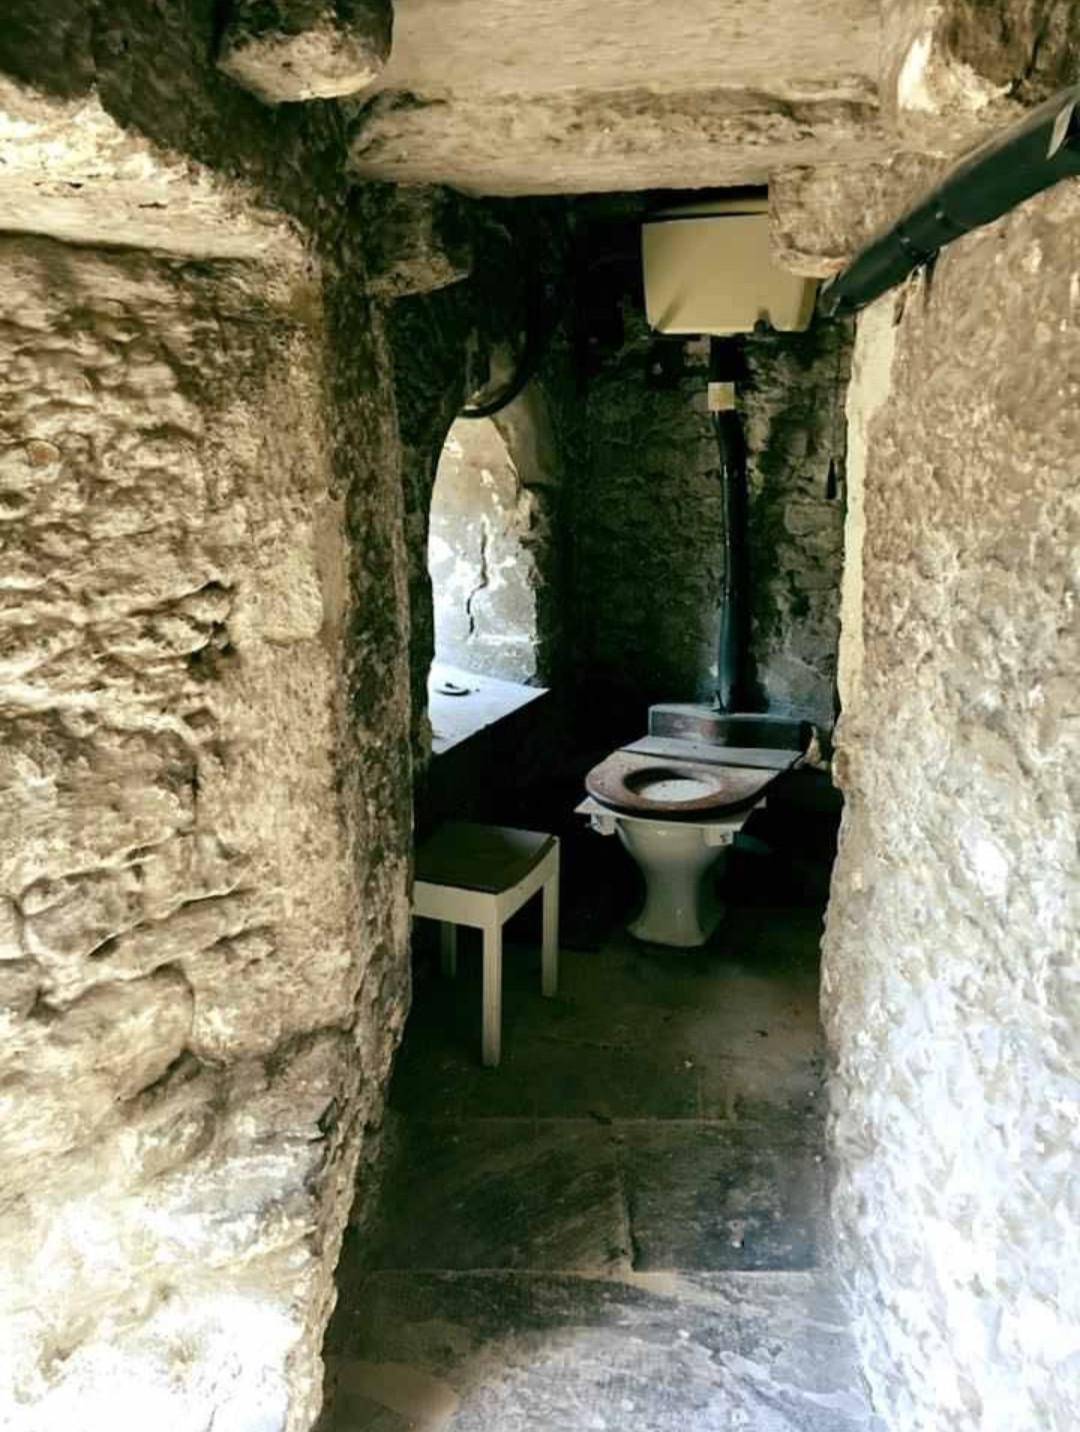 This room in the Tower of London was a cell for Adolf Hitler upon his capture during WW2. The toilet was installed purely because of his human rights.jpg